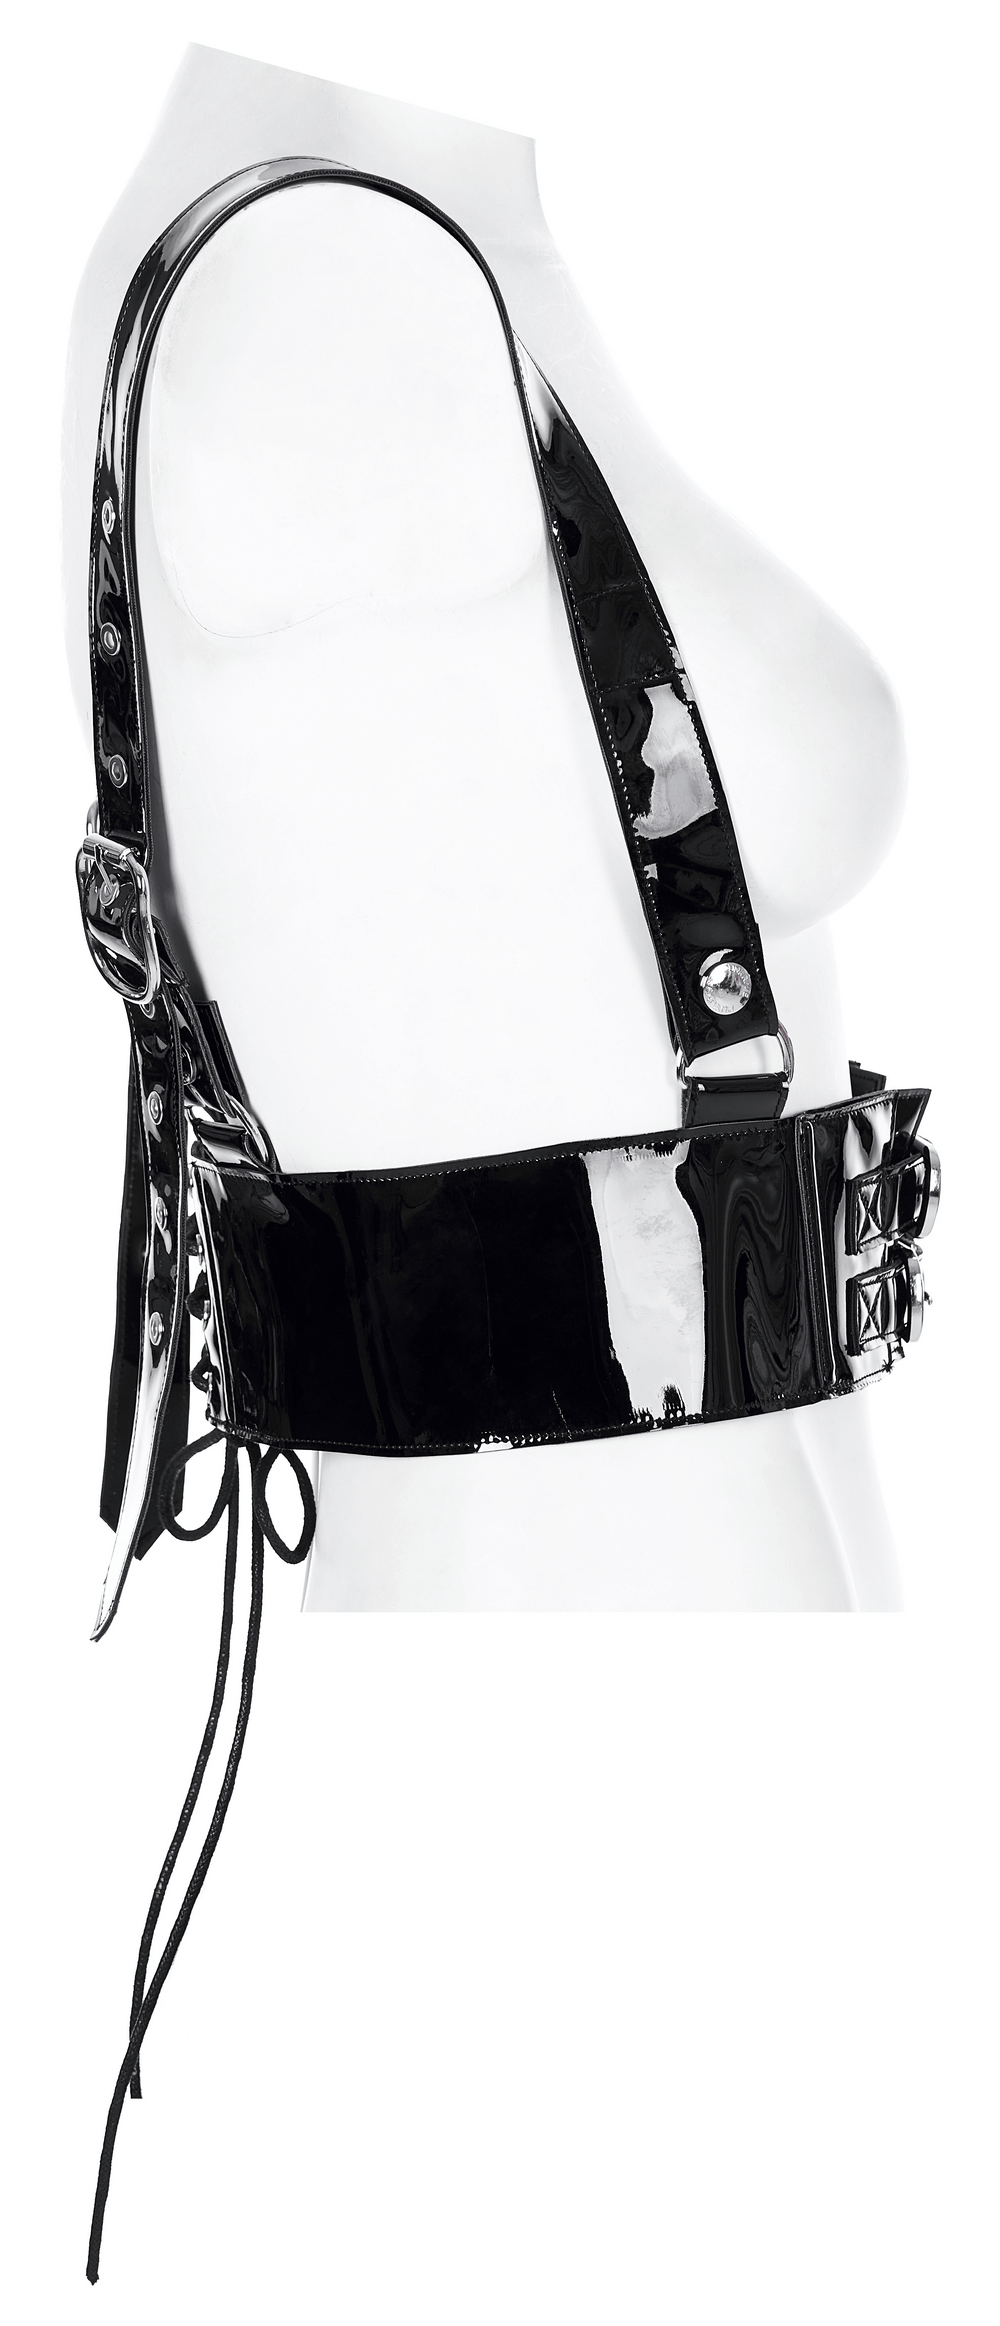 Glossy PU Leather Corset Belt with Metal Accents